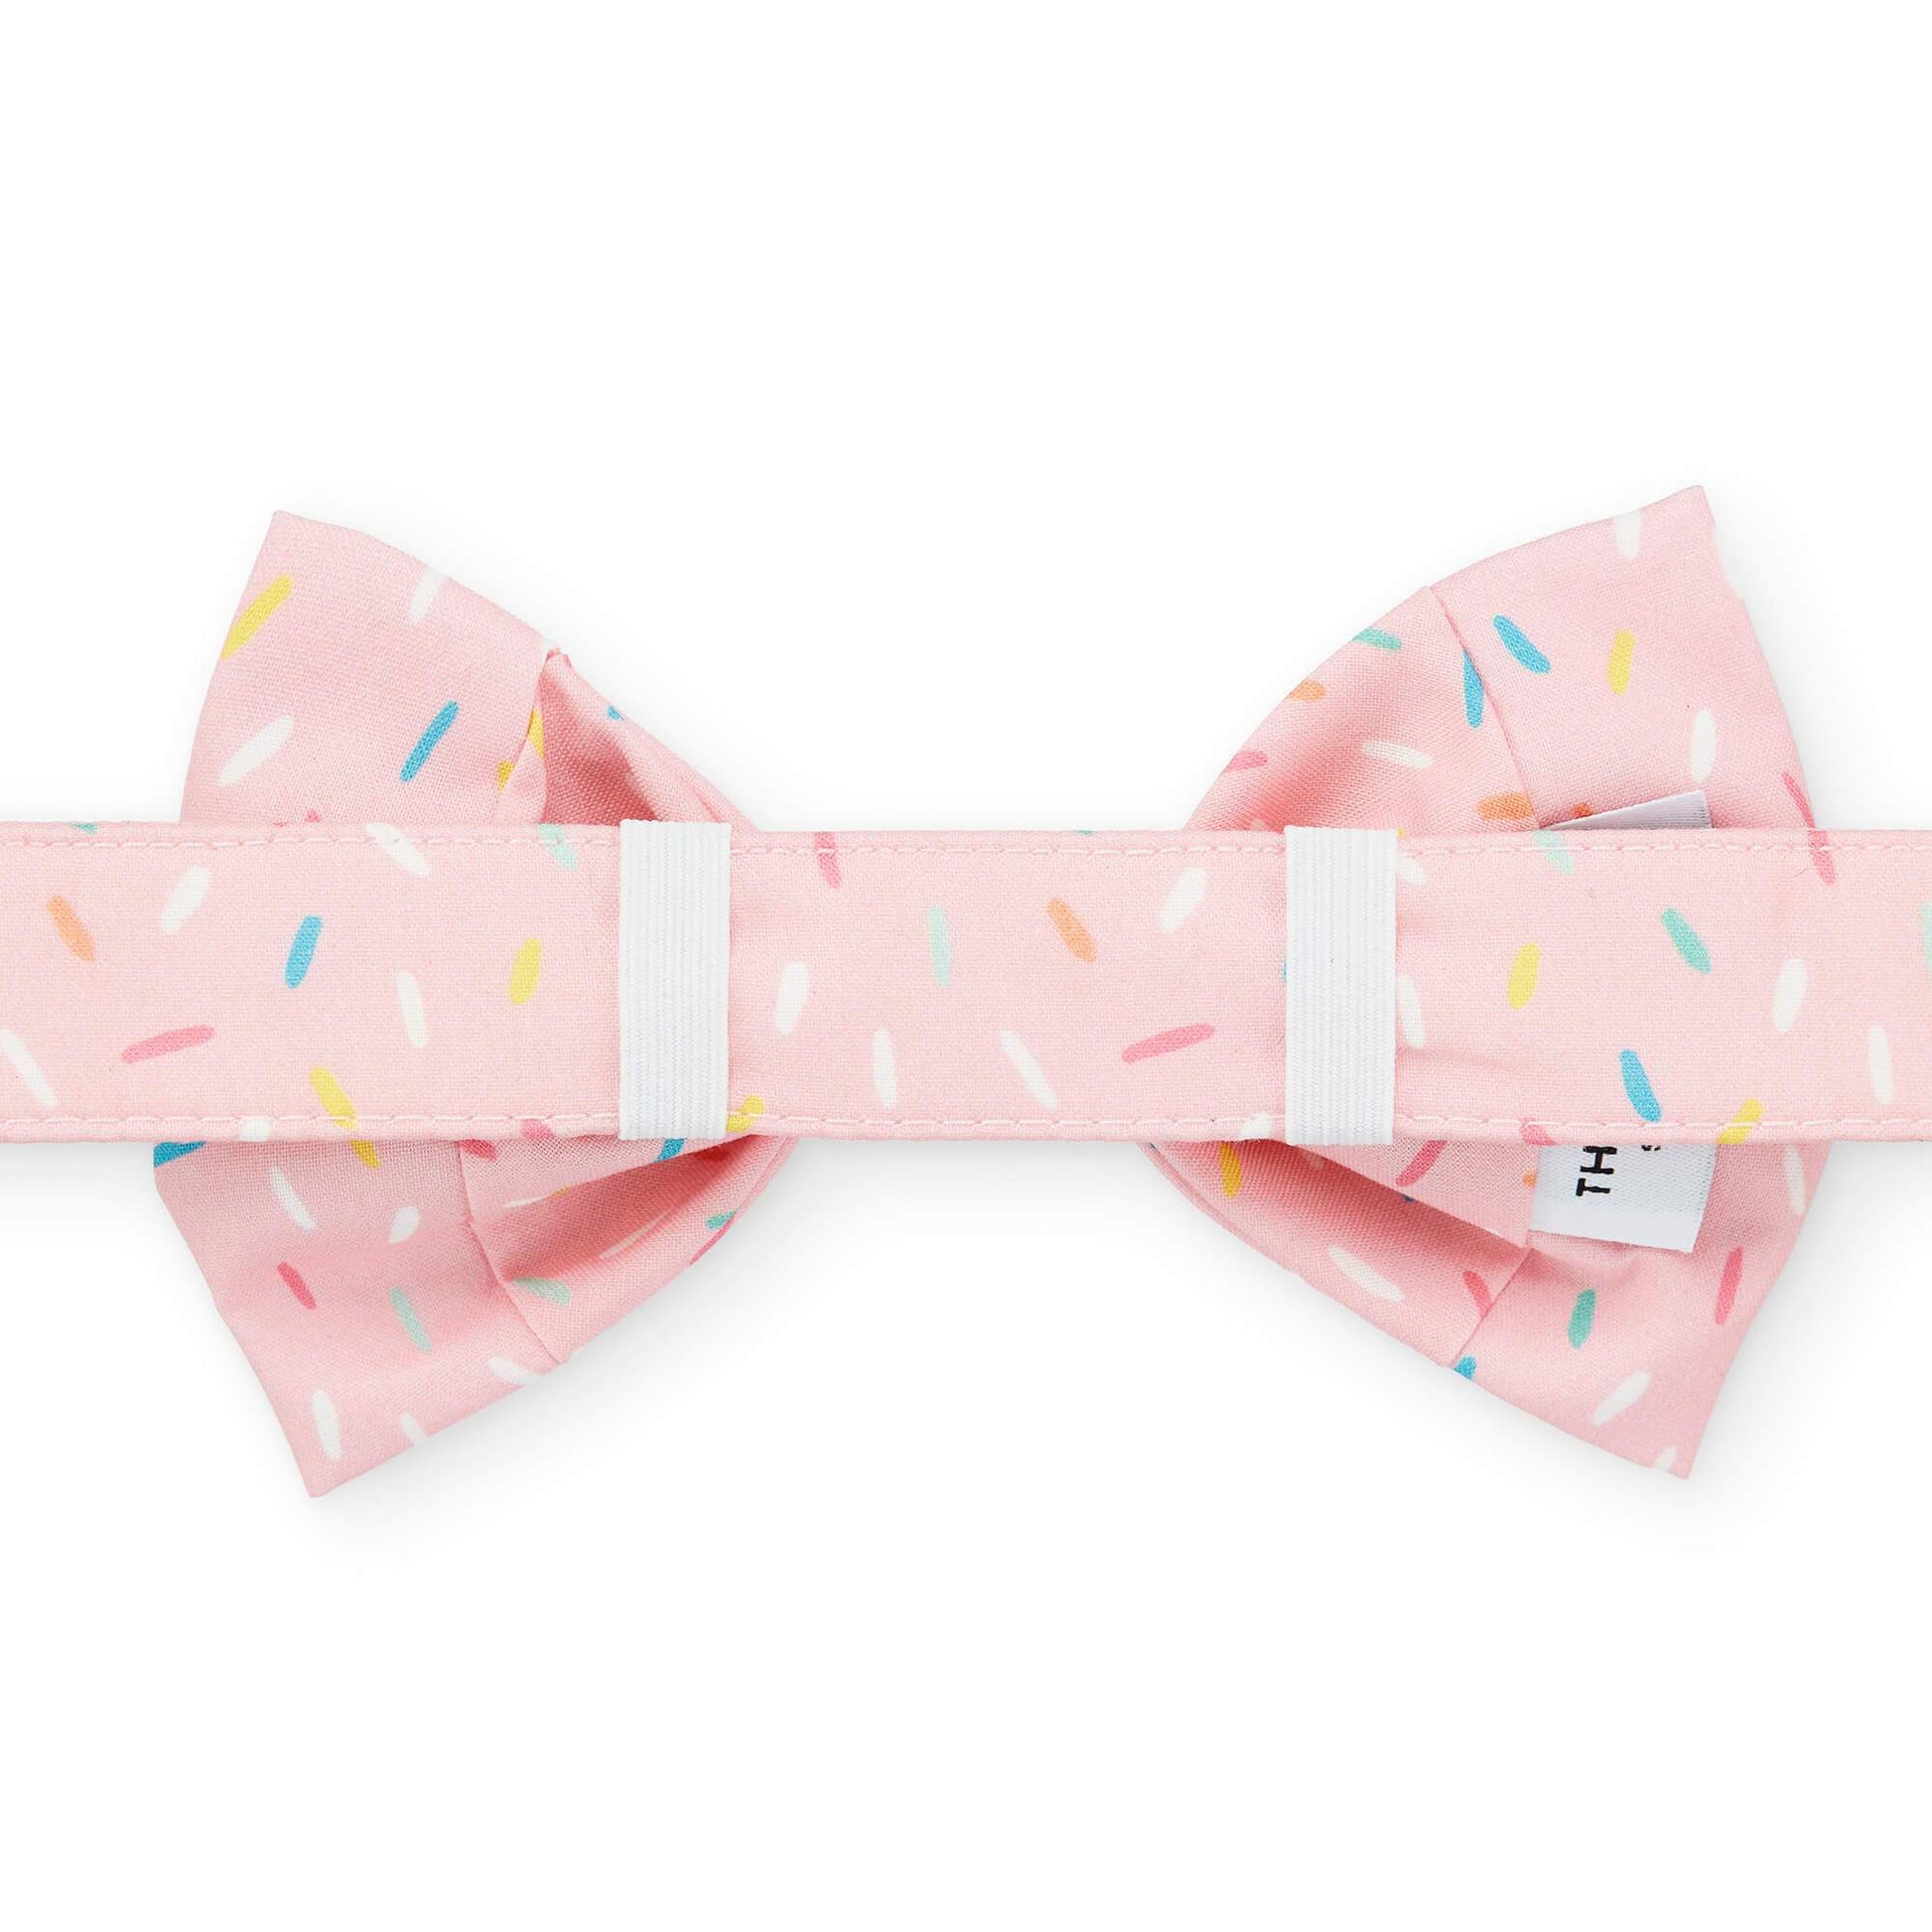 Sprinkles Bow Tie Collar from The Foggy Dog 